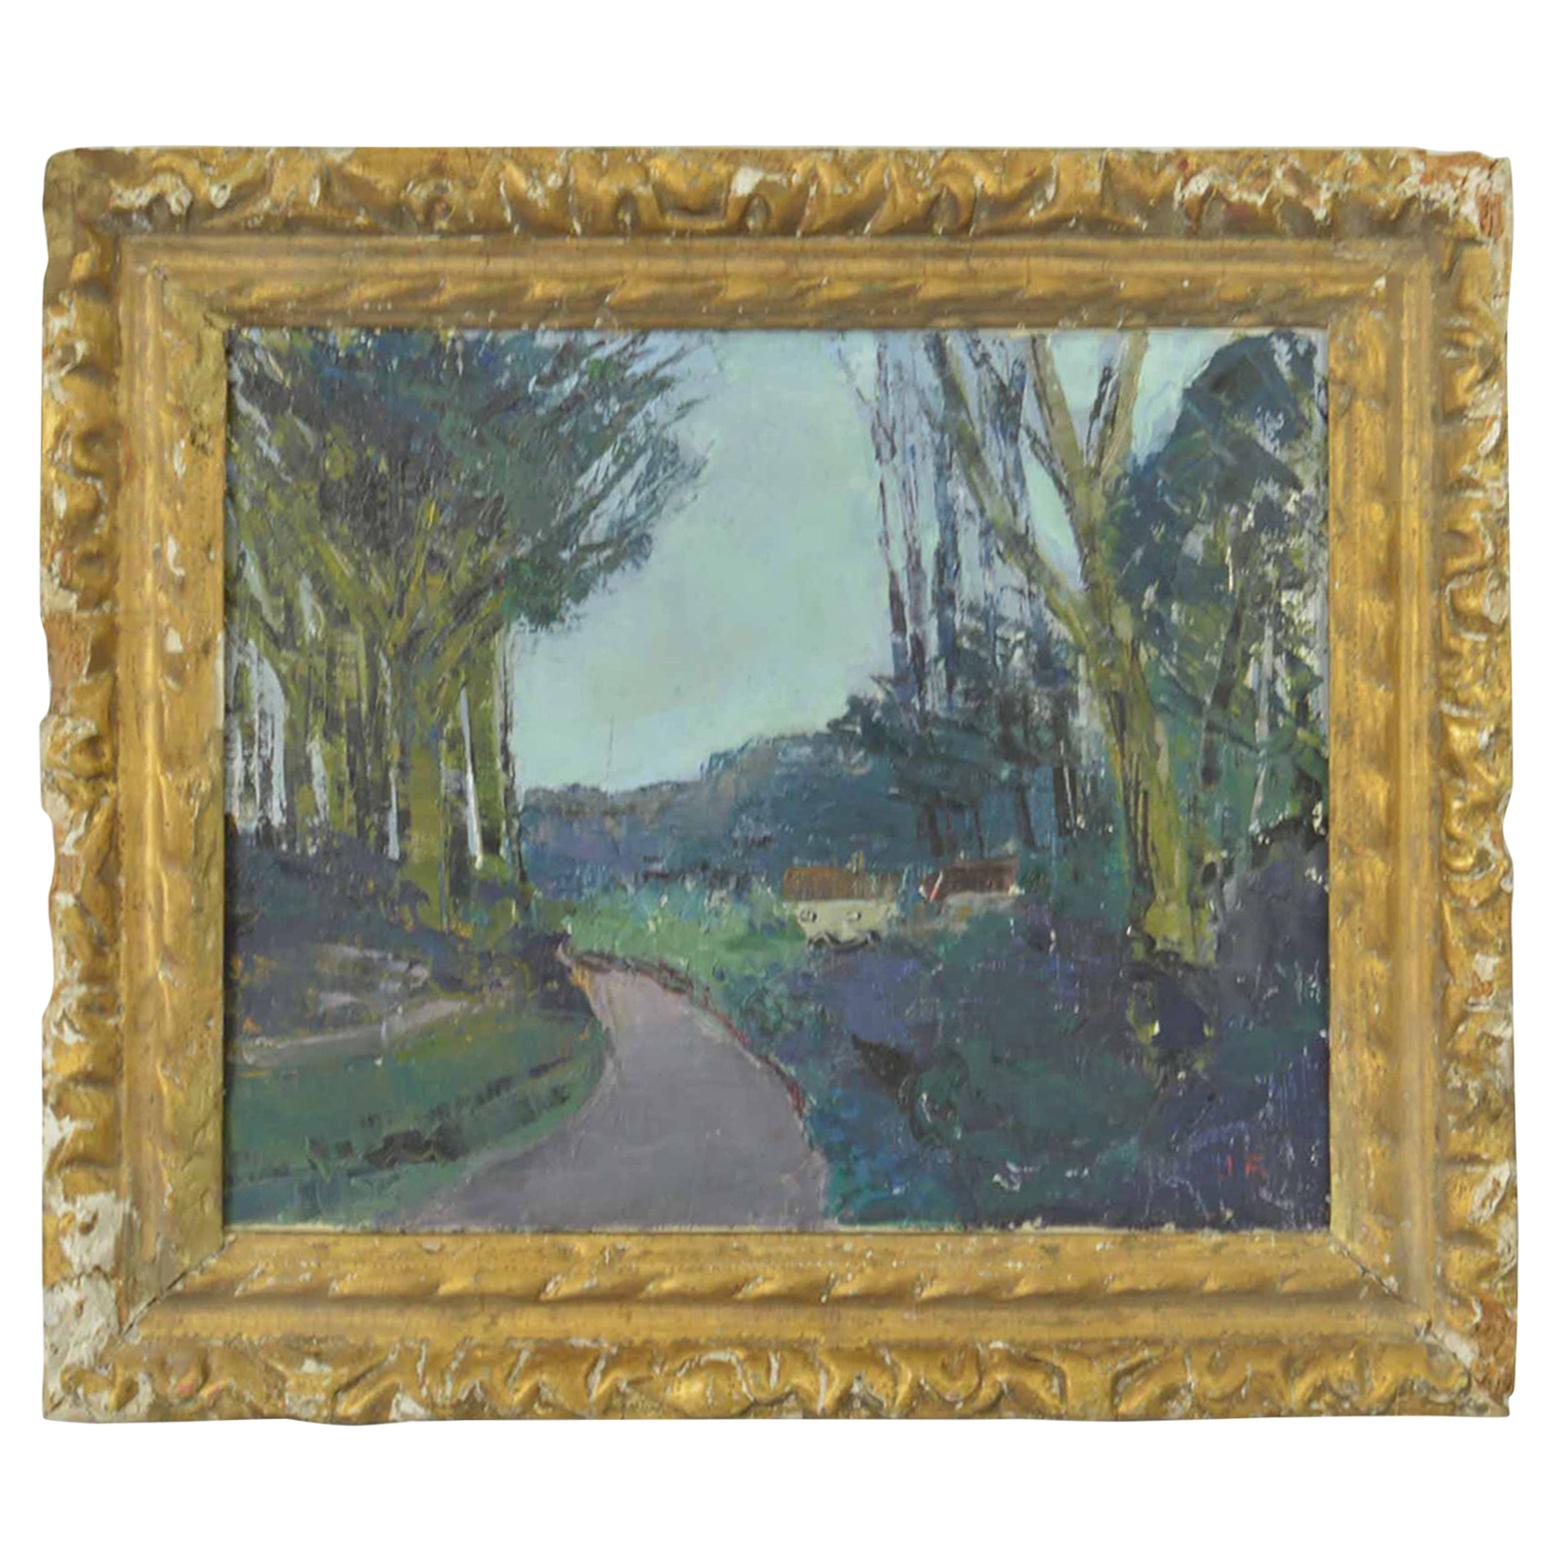 Midcentury Impressionist Painting of an English Landscape